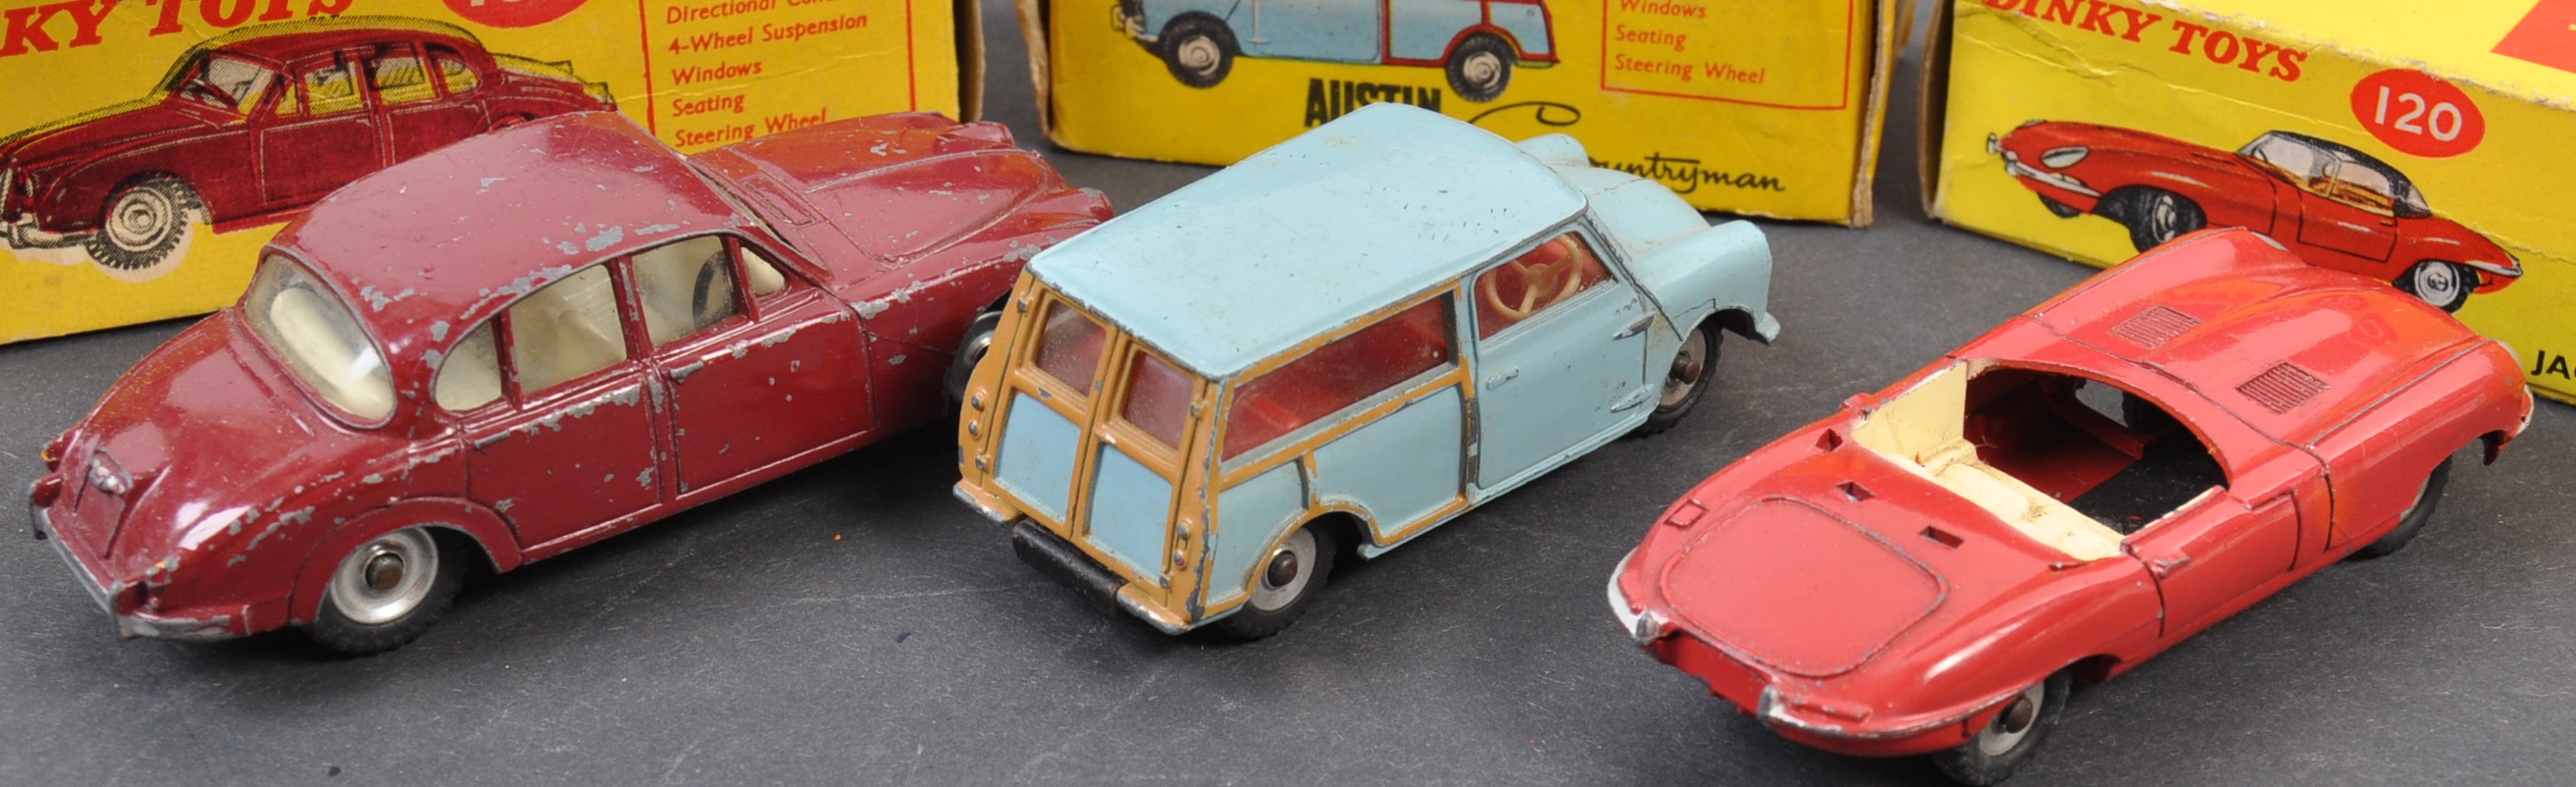 COLLECTION OF VINTAGE DINKY TOYS BOXED DIECAST MODELS - Image 3 of 4